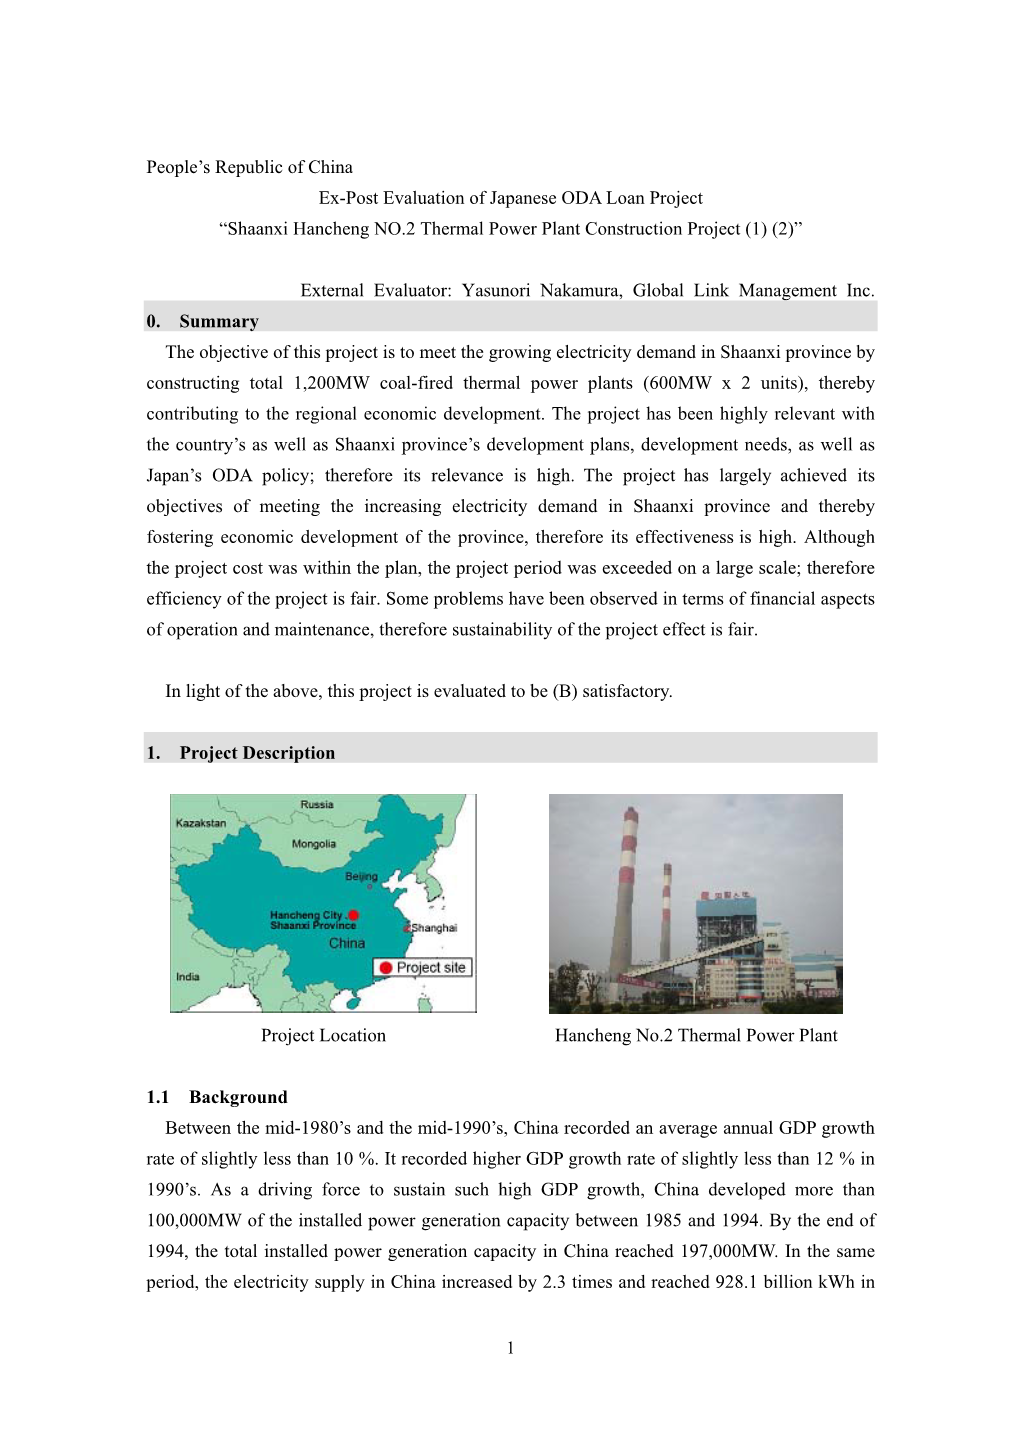 Shaanxi Hancheng NO.2 Thermal Power Plant Construction Project (1) (2)”